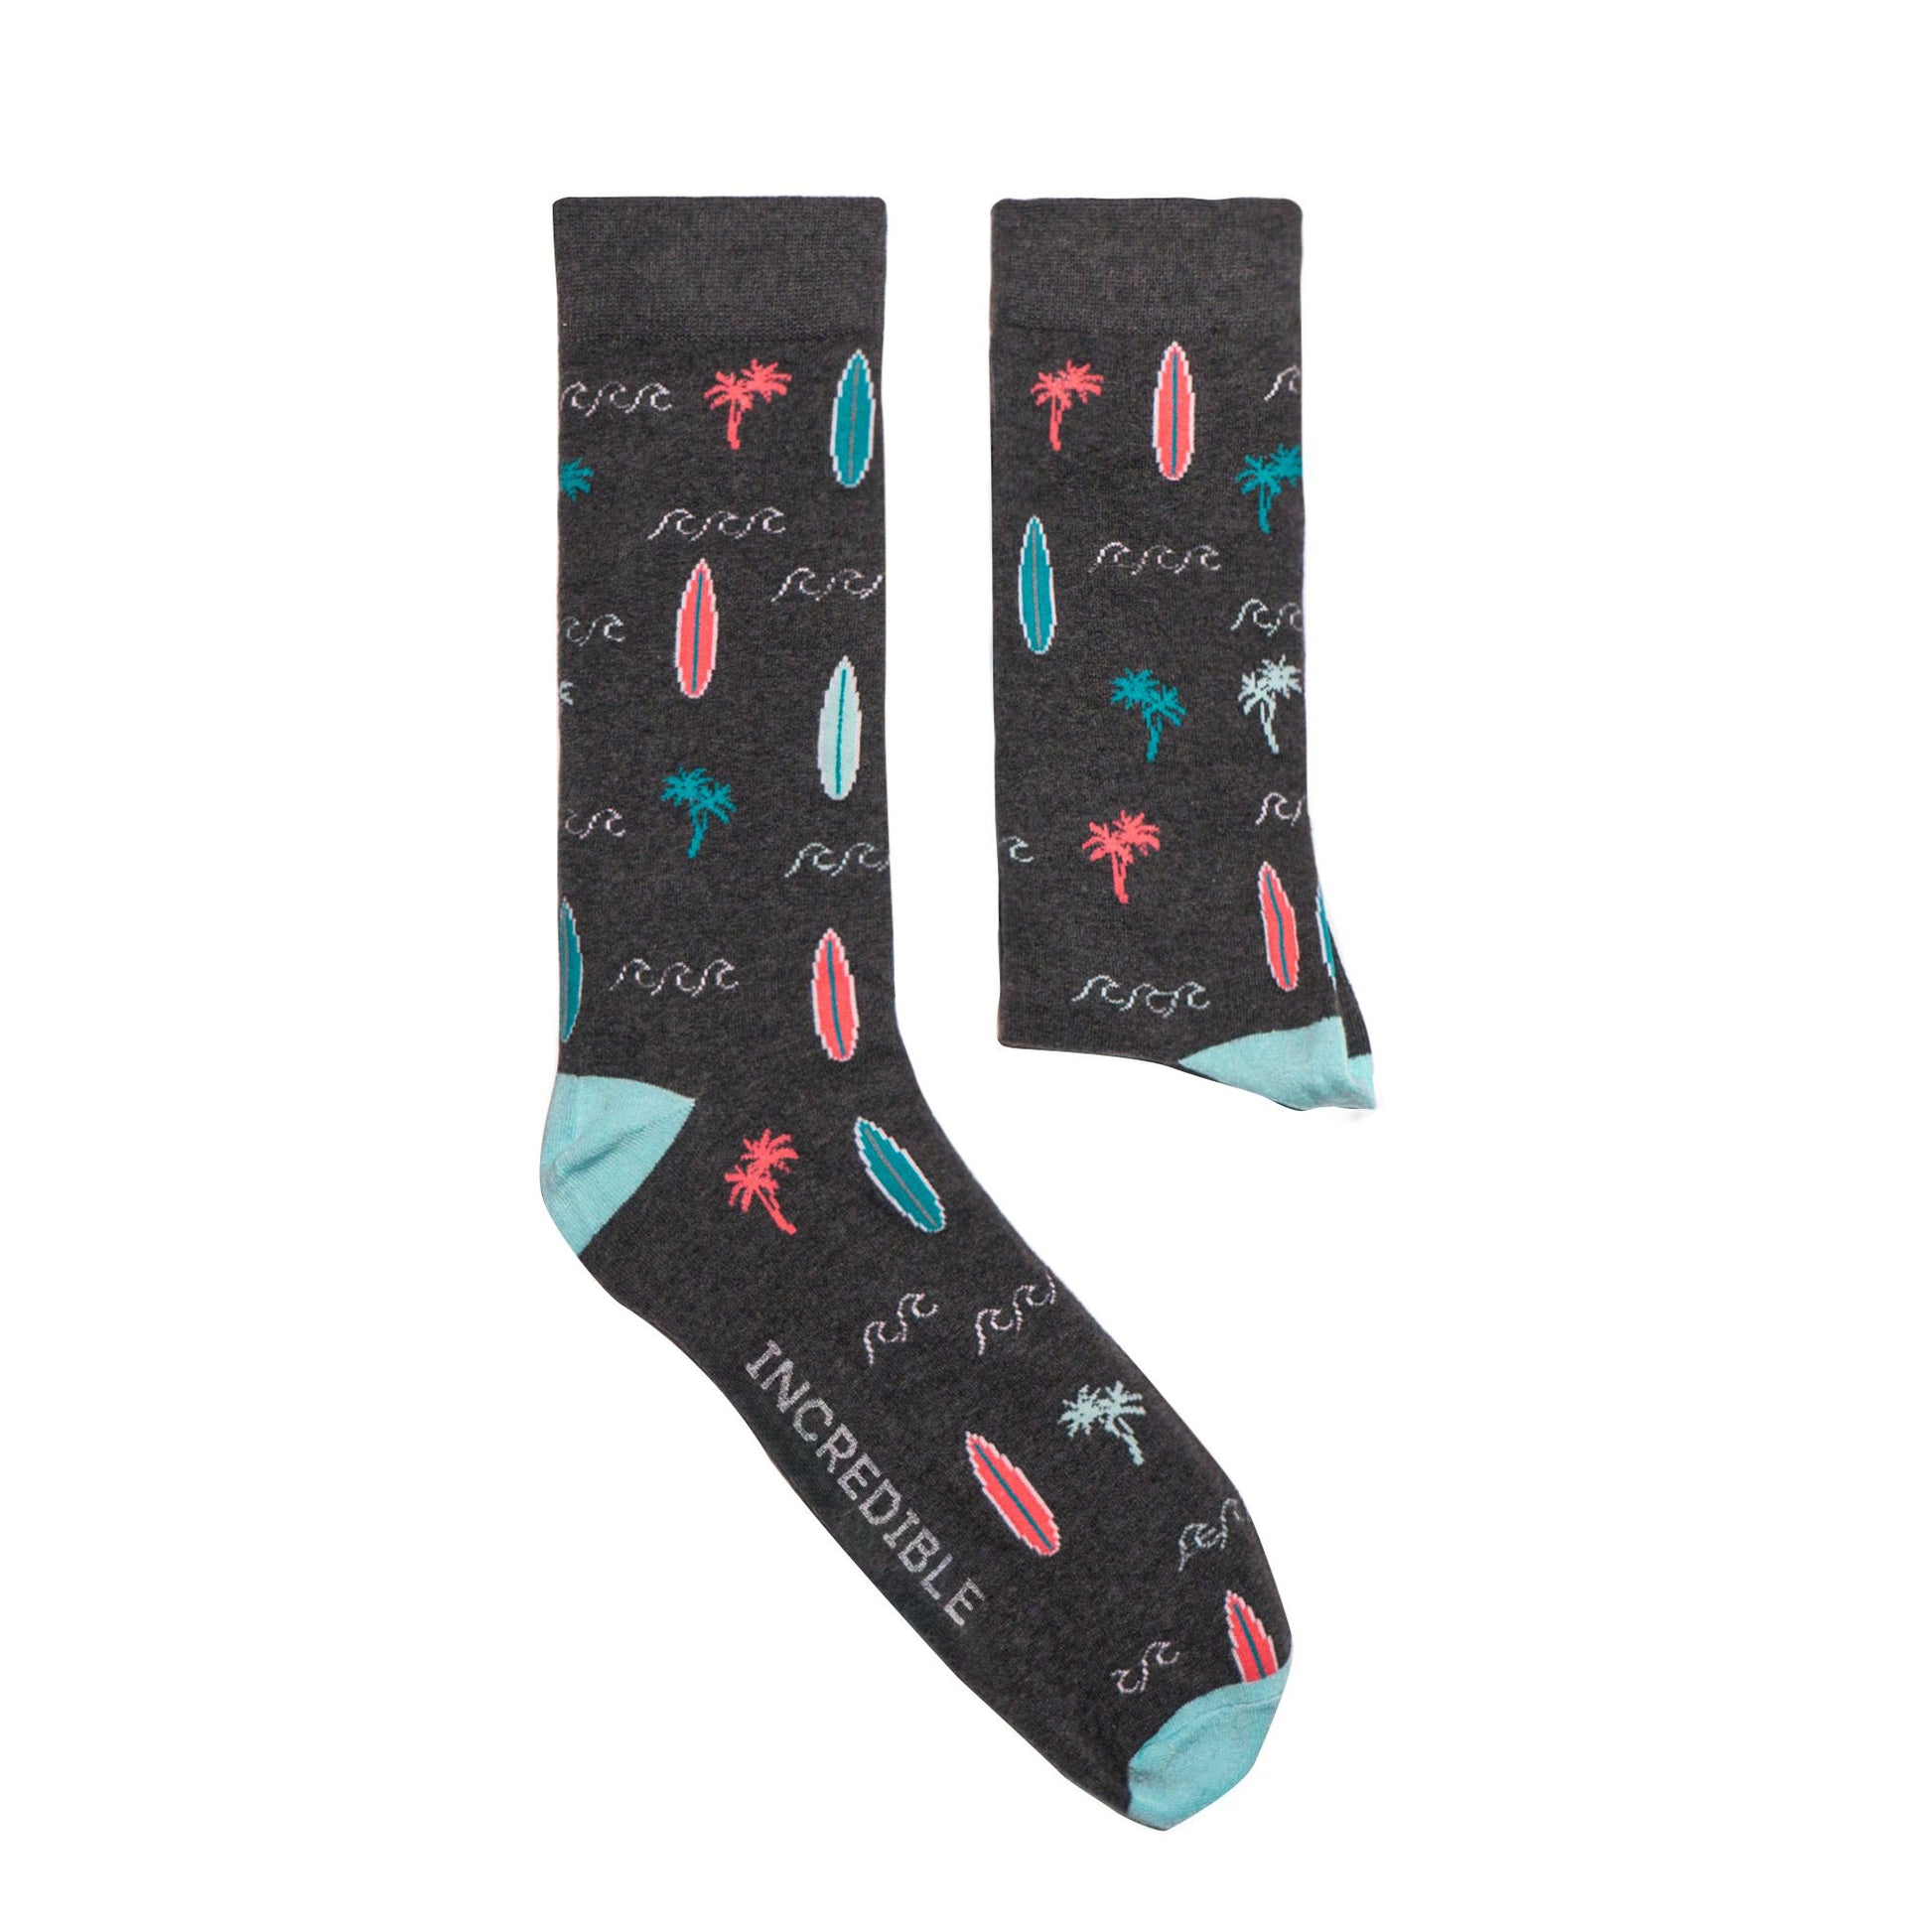 Surf boards, the best waves and beautiful palm trees make for the perfect paradise pair of socks for summer.. or even winter. Bright and breezy pastels on a light grey base. Soft. Strong. Sustainable. Comfortable.  Available in US Men’s 4-8 and 8-12